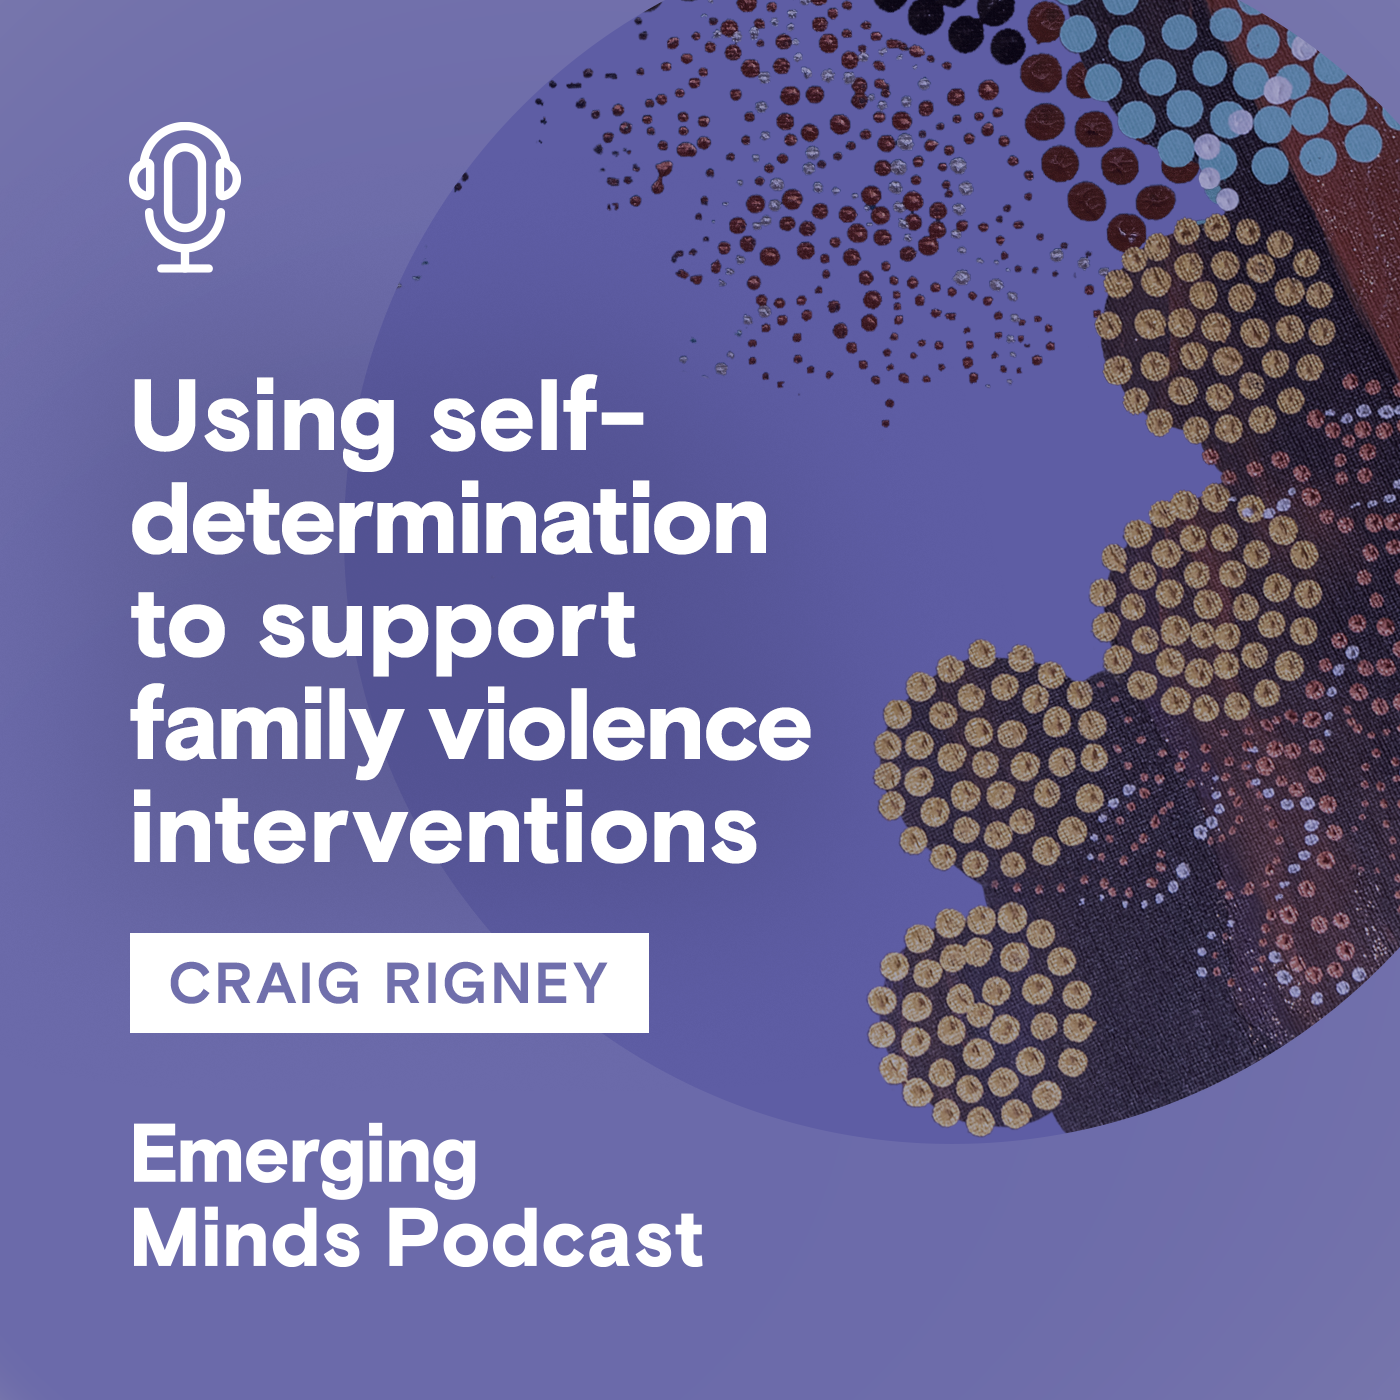 Using self-determination to support family violence interventions